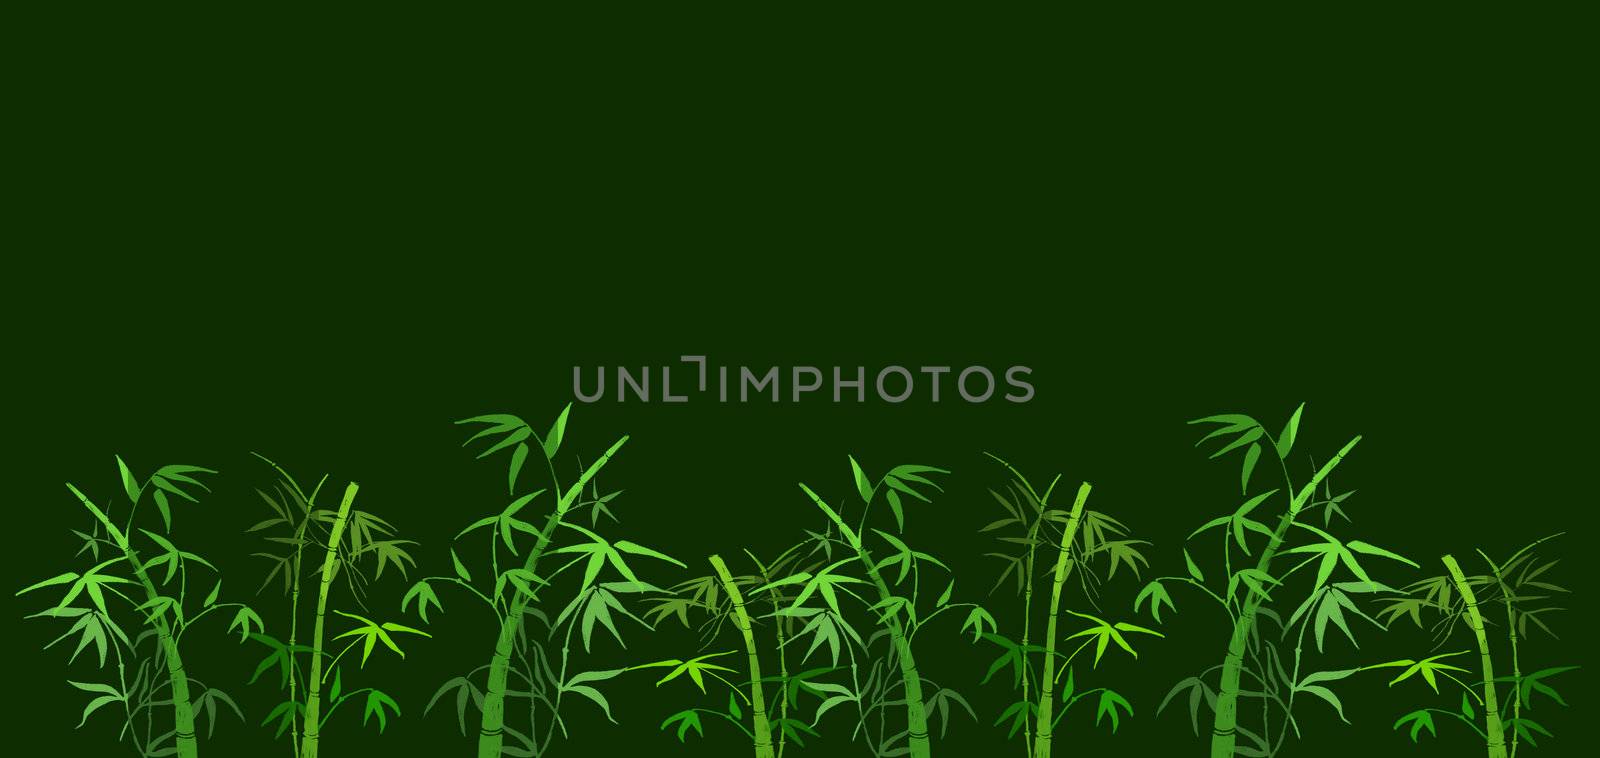 On green background the branches of bamboo